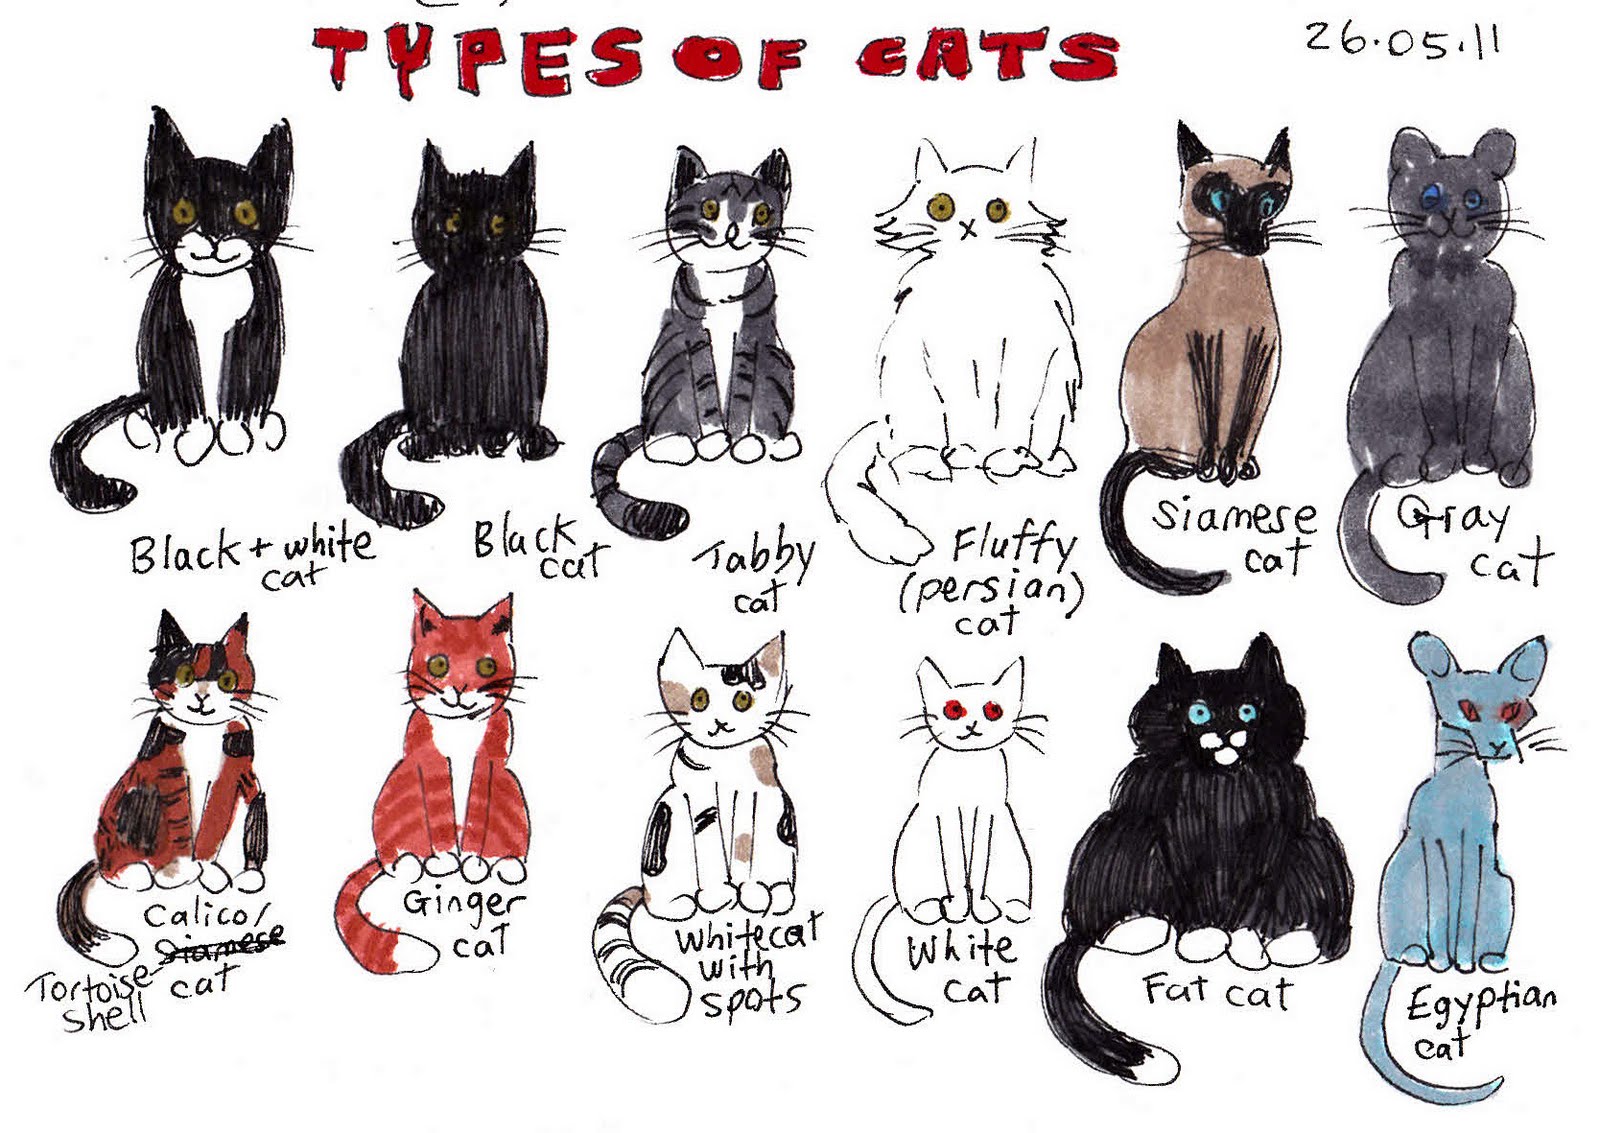 How many species of cats are there?